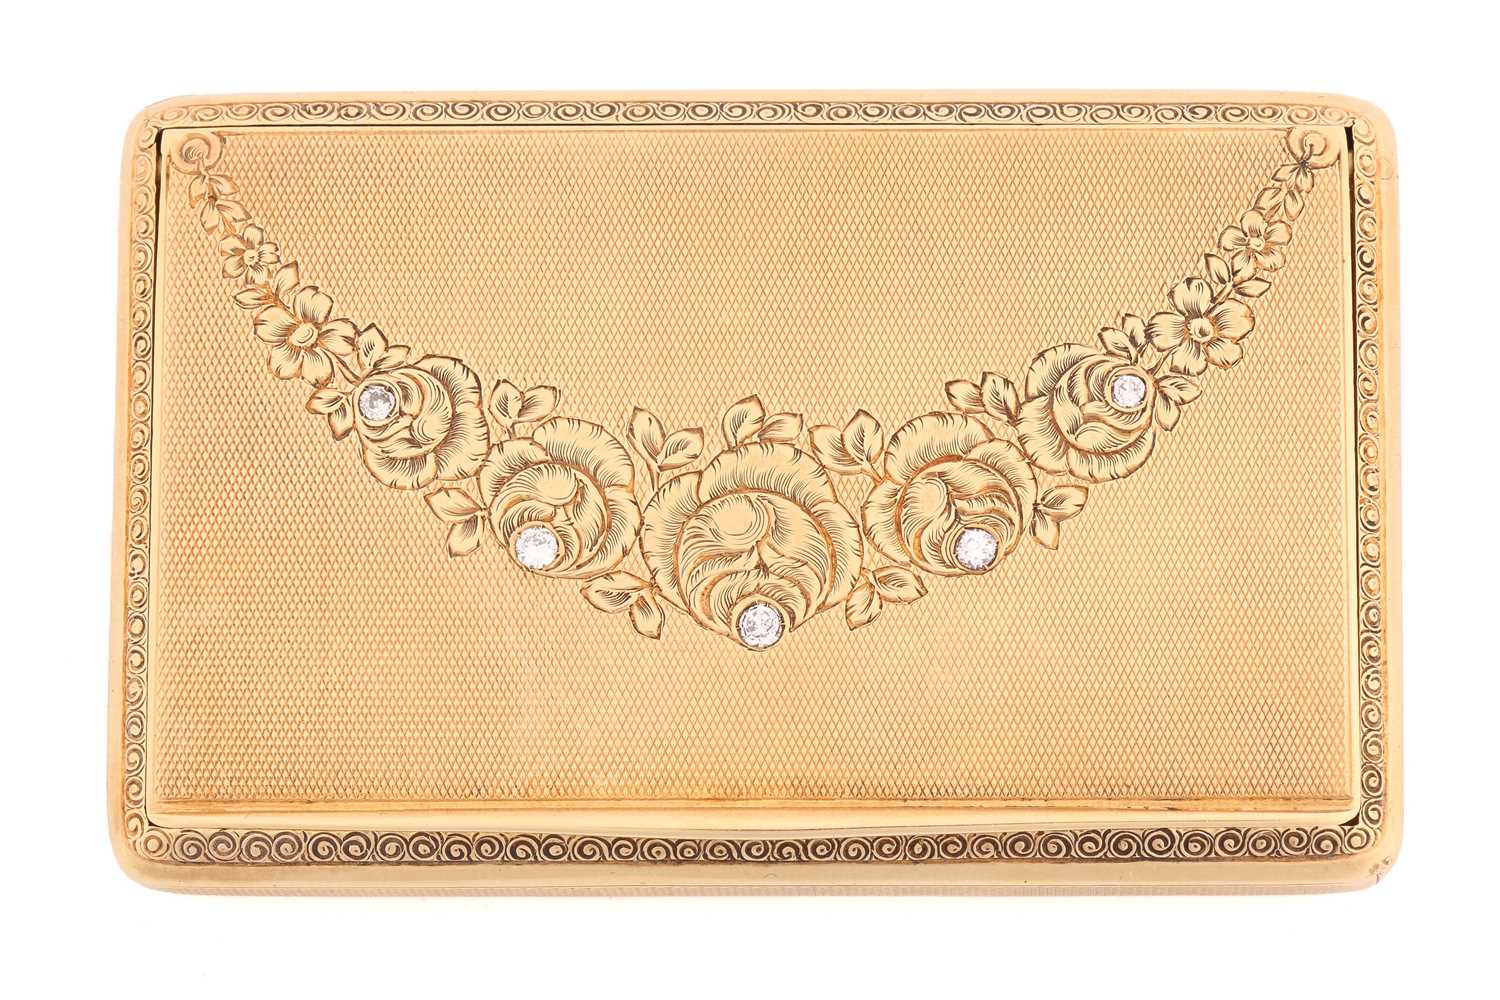 A floral snuffbox set with diamonds, of rectangular form with rounded corners, the cover, sides